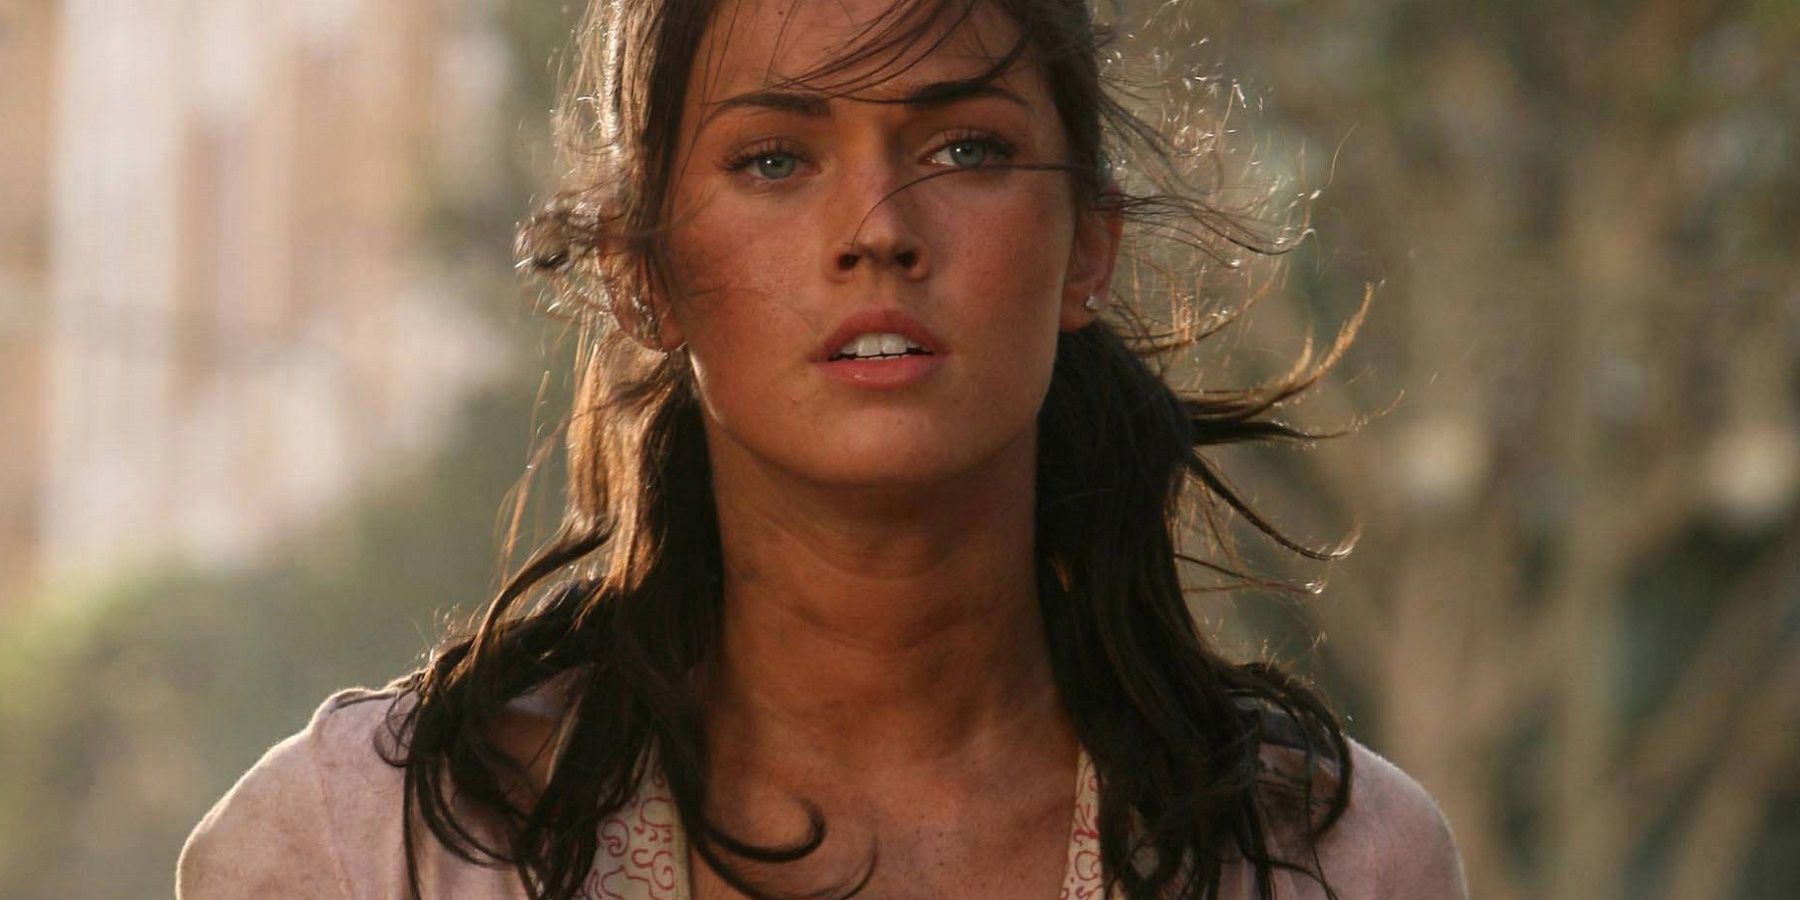 The Untold Story of Megan Fox and Transformers